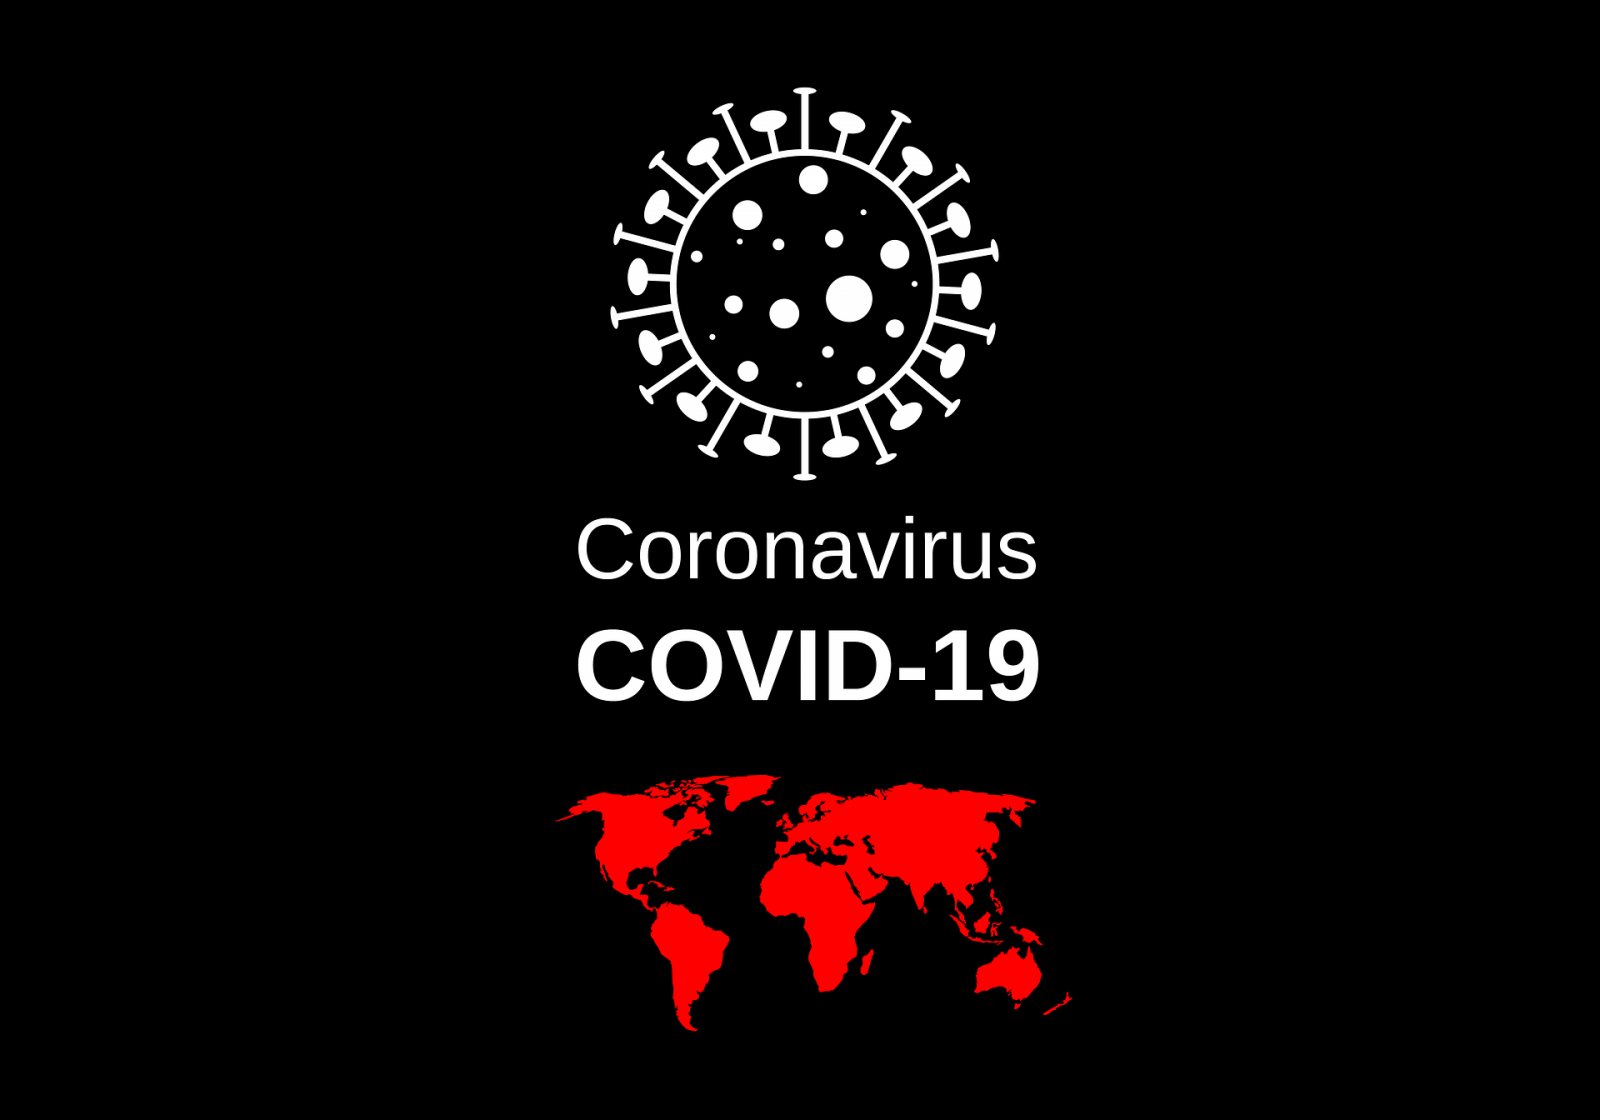 Is COVID-19 a Biological Weapon?